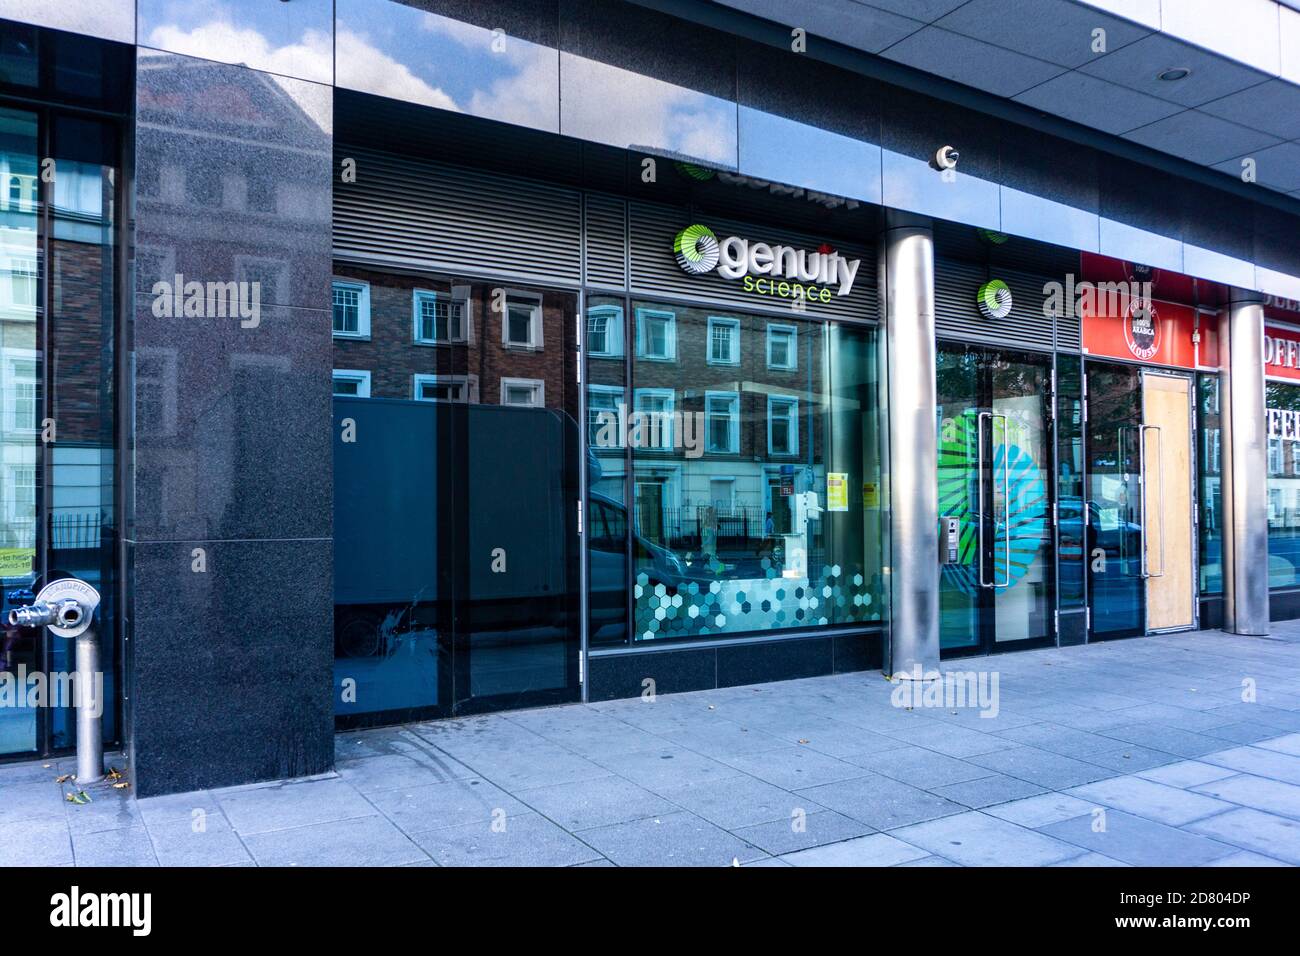 DNA Research. The offices of Genuity Science in Pearse Street, Dublin, Ireland. The company is involved in the collection of DNA to fight disease. Stock Photo